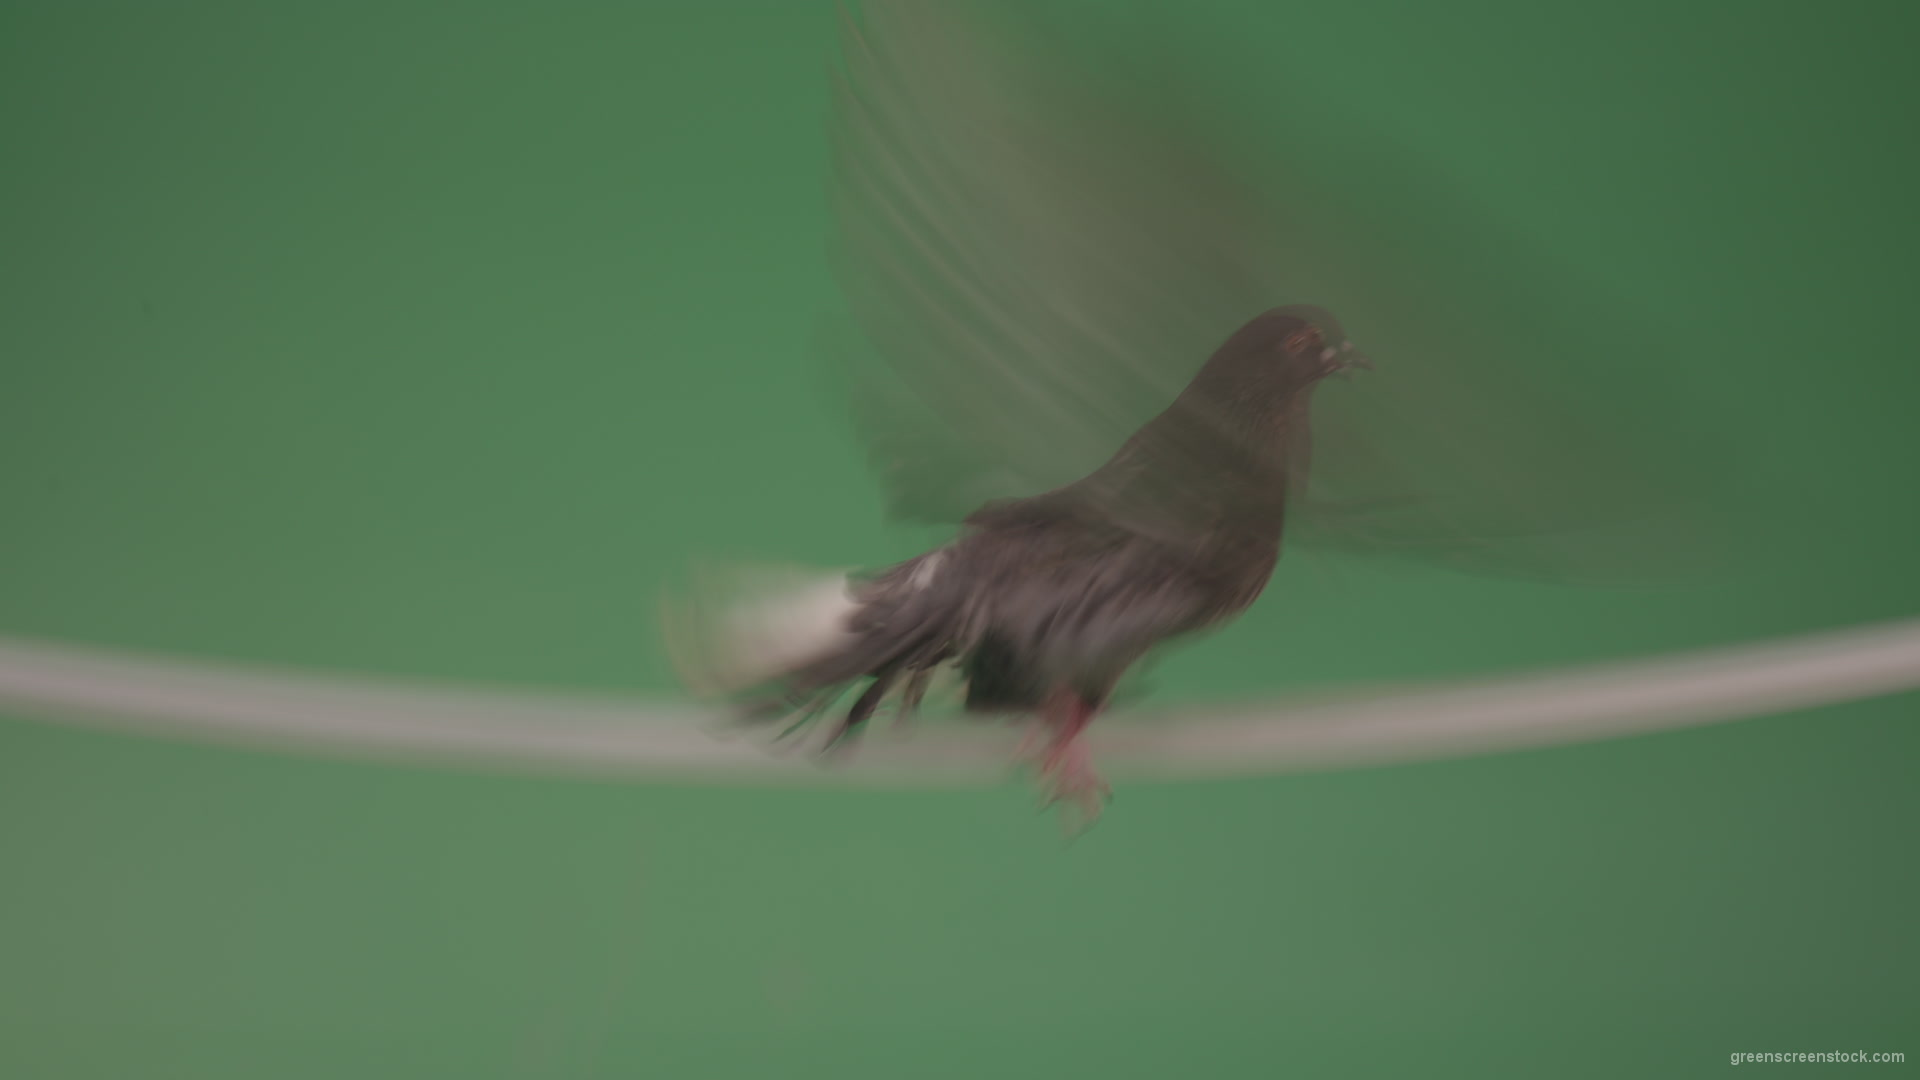 Bird-of-gray-color-doves-flies-from-branch-to-heaven-isolated-on-chromakey-background_007 Green Screen Stock